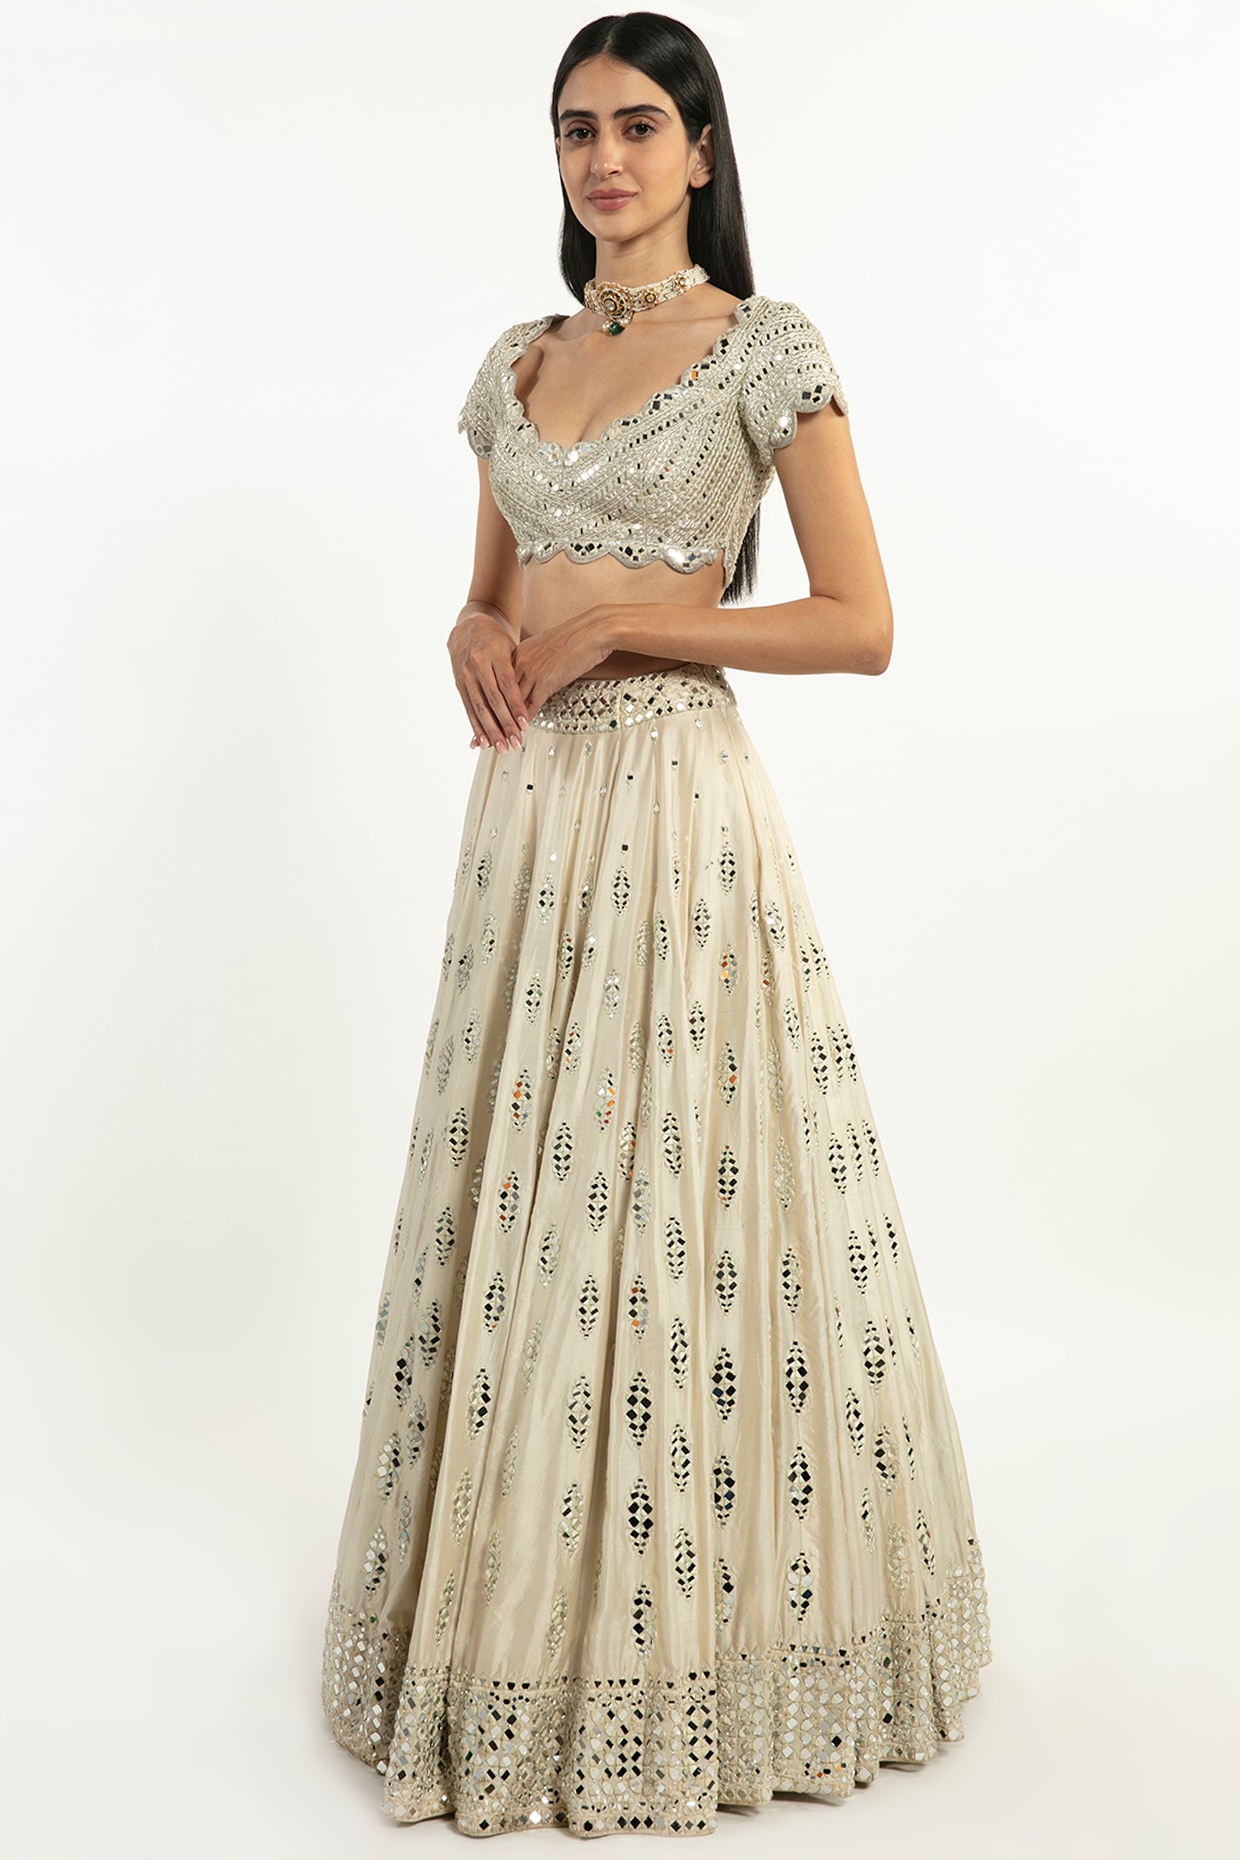 Abhinav Mishra's new bridal collection is perfect for destination weddings